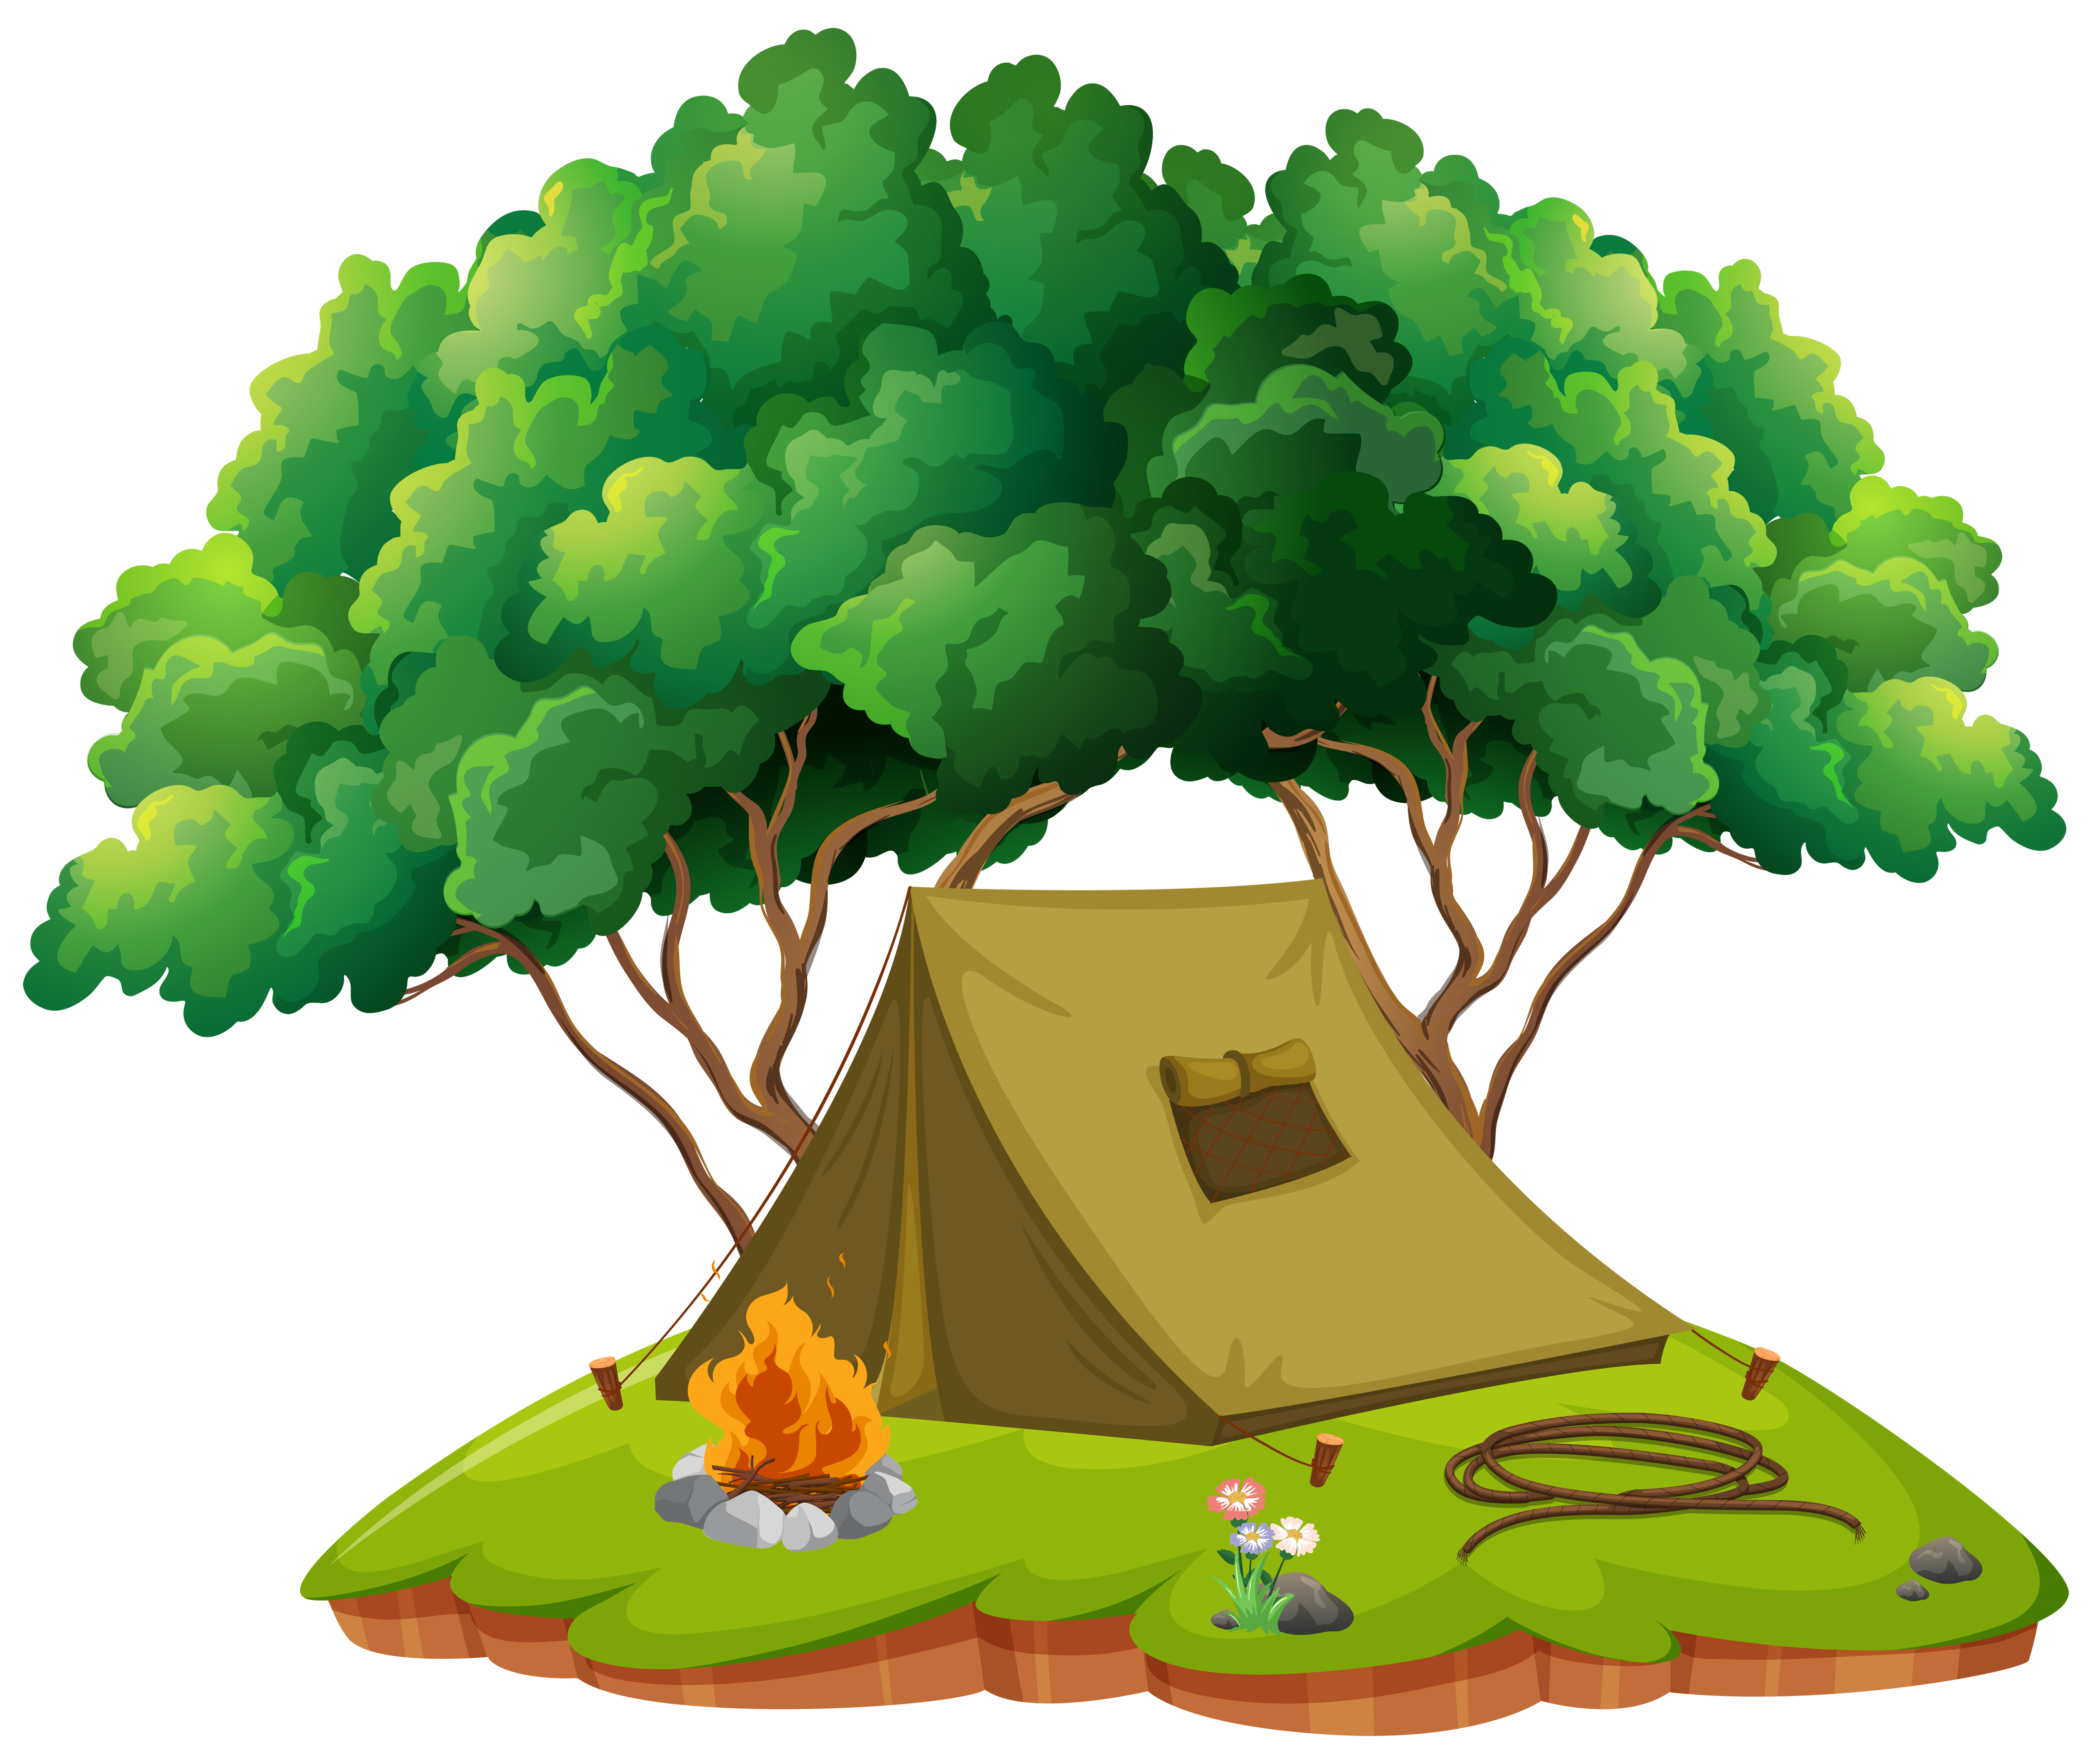 Camping ground with tent and campfire 526204 Download Free Vectors Clipart Graphics & Vector Art